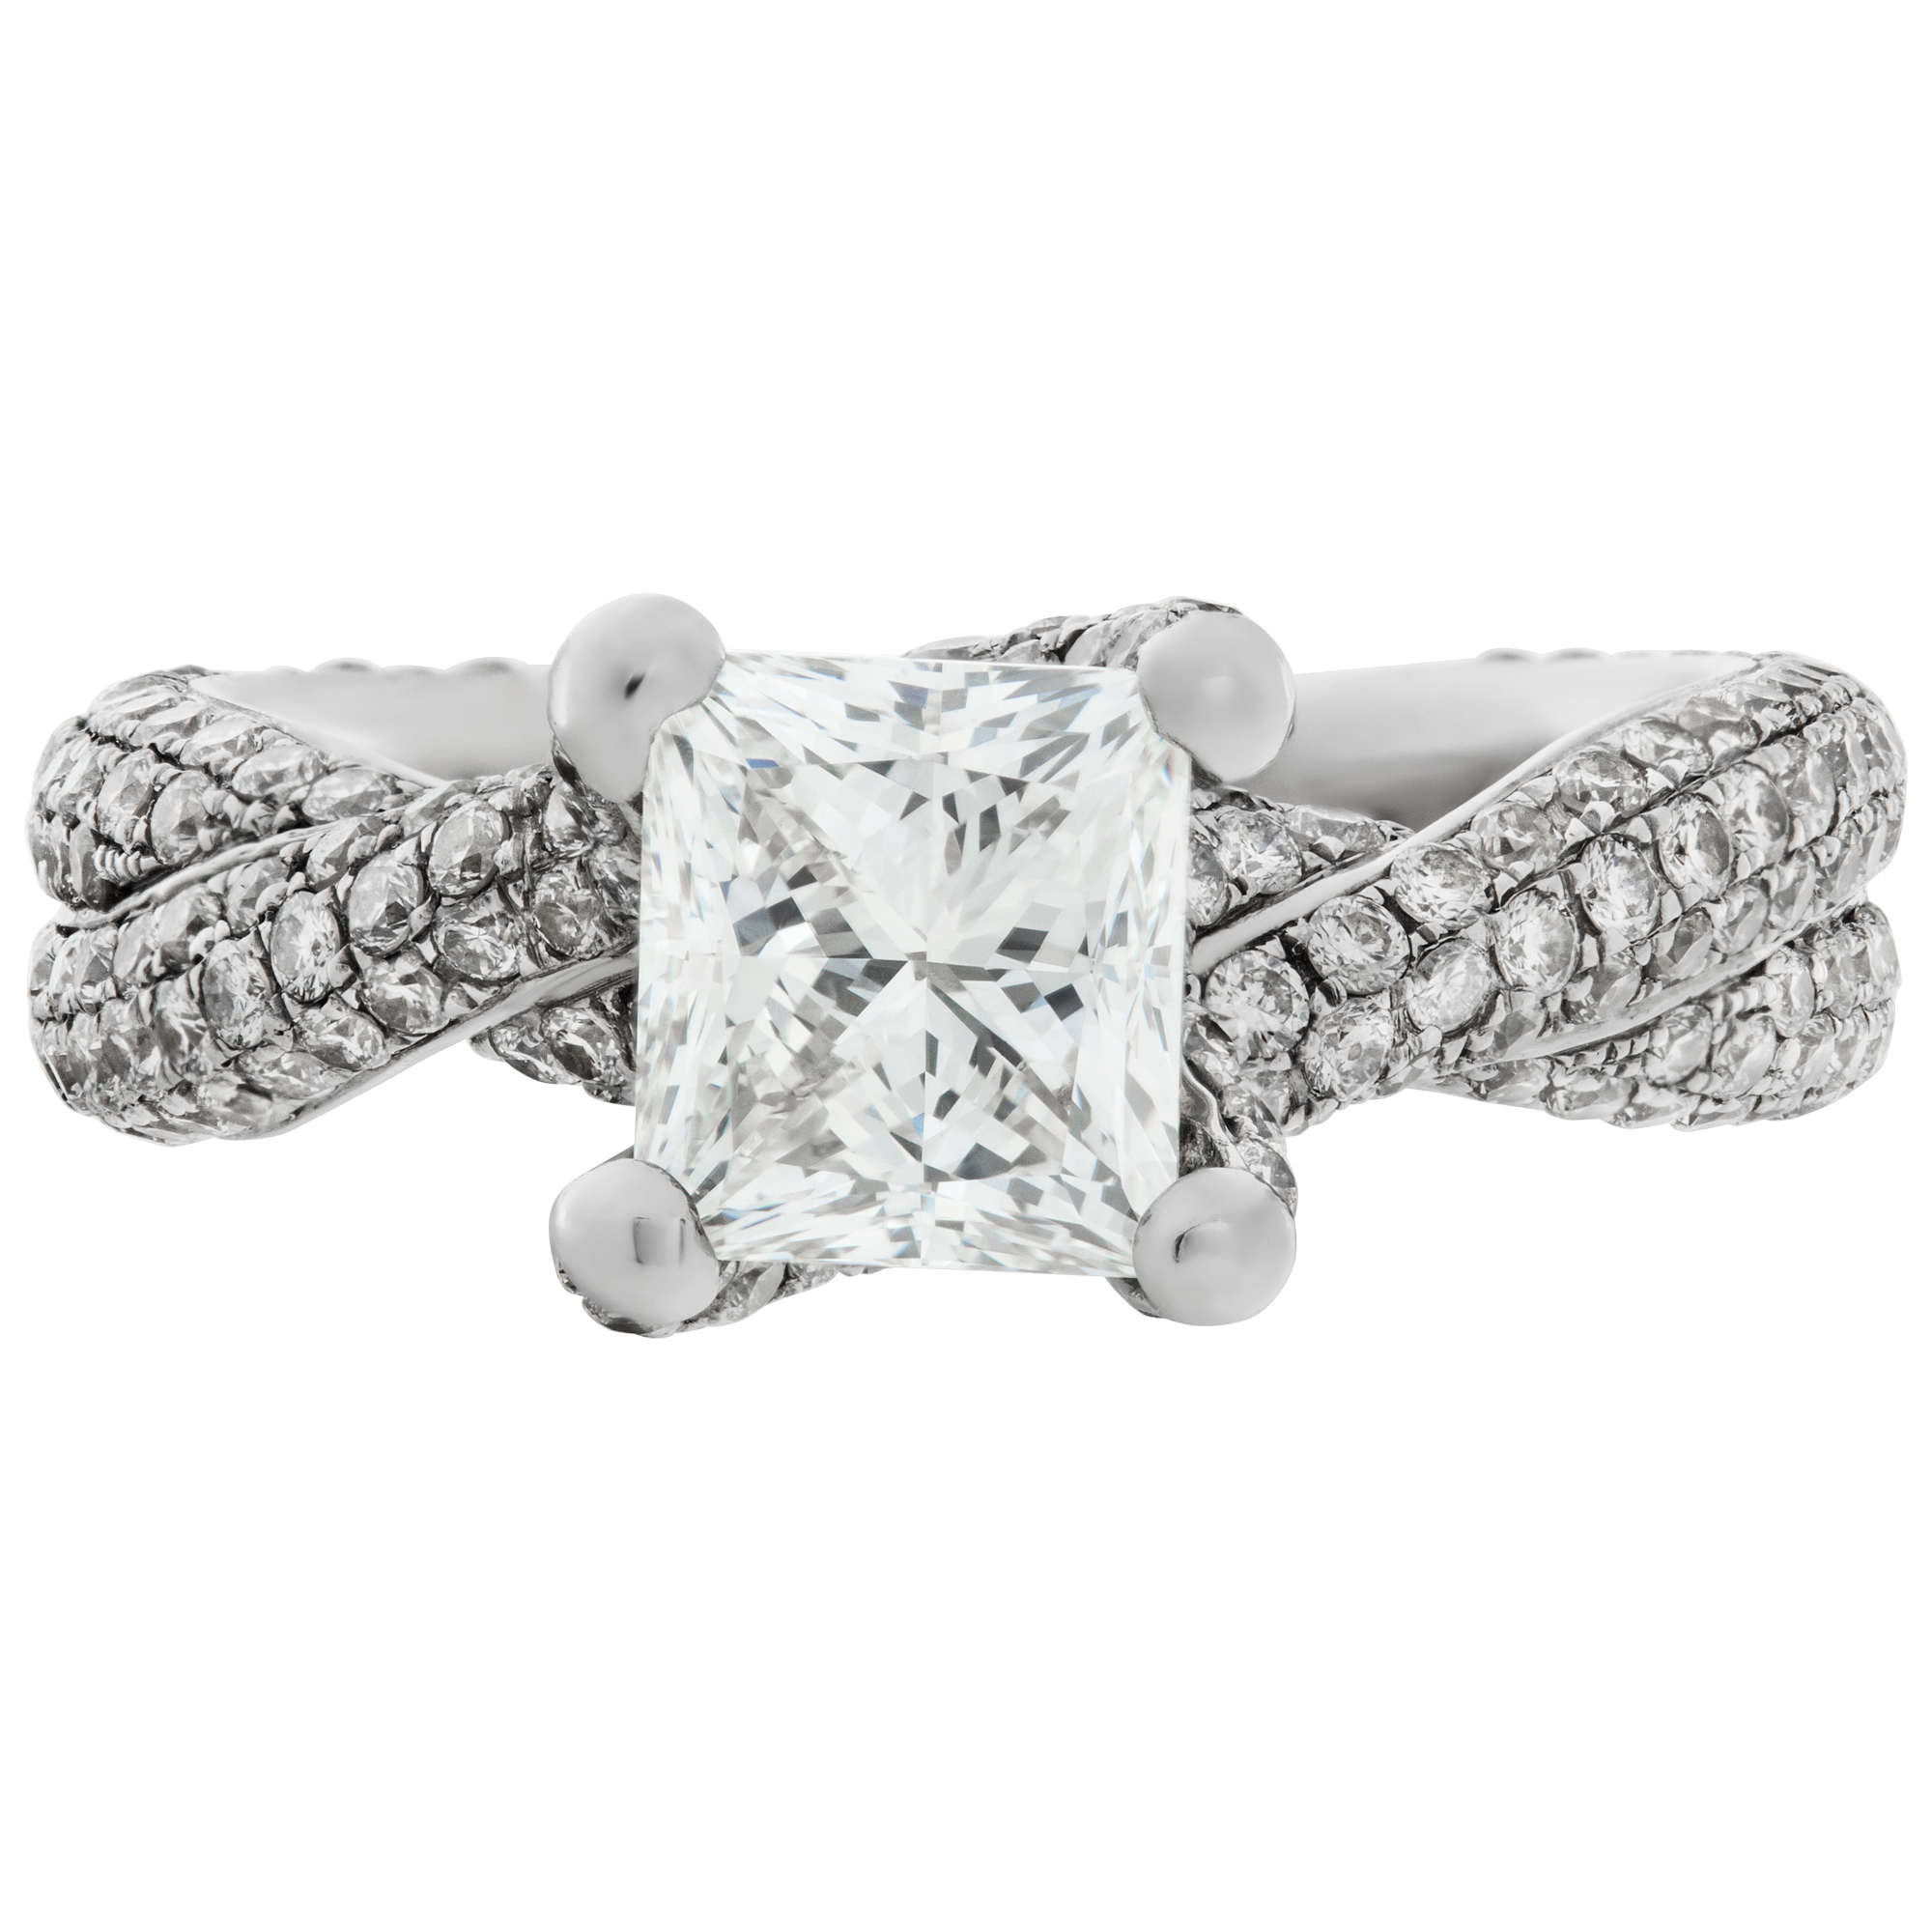 GIA certified rectangular diamond ring 1.53 cts (I Color, VS2 Clarity) set in micro pave diamond 18k white gold. image 2